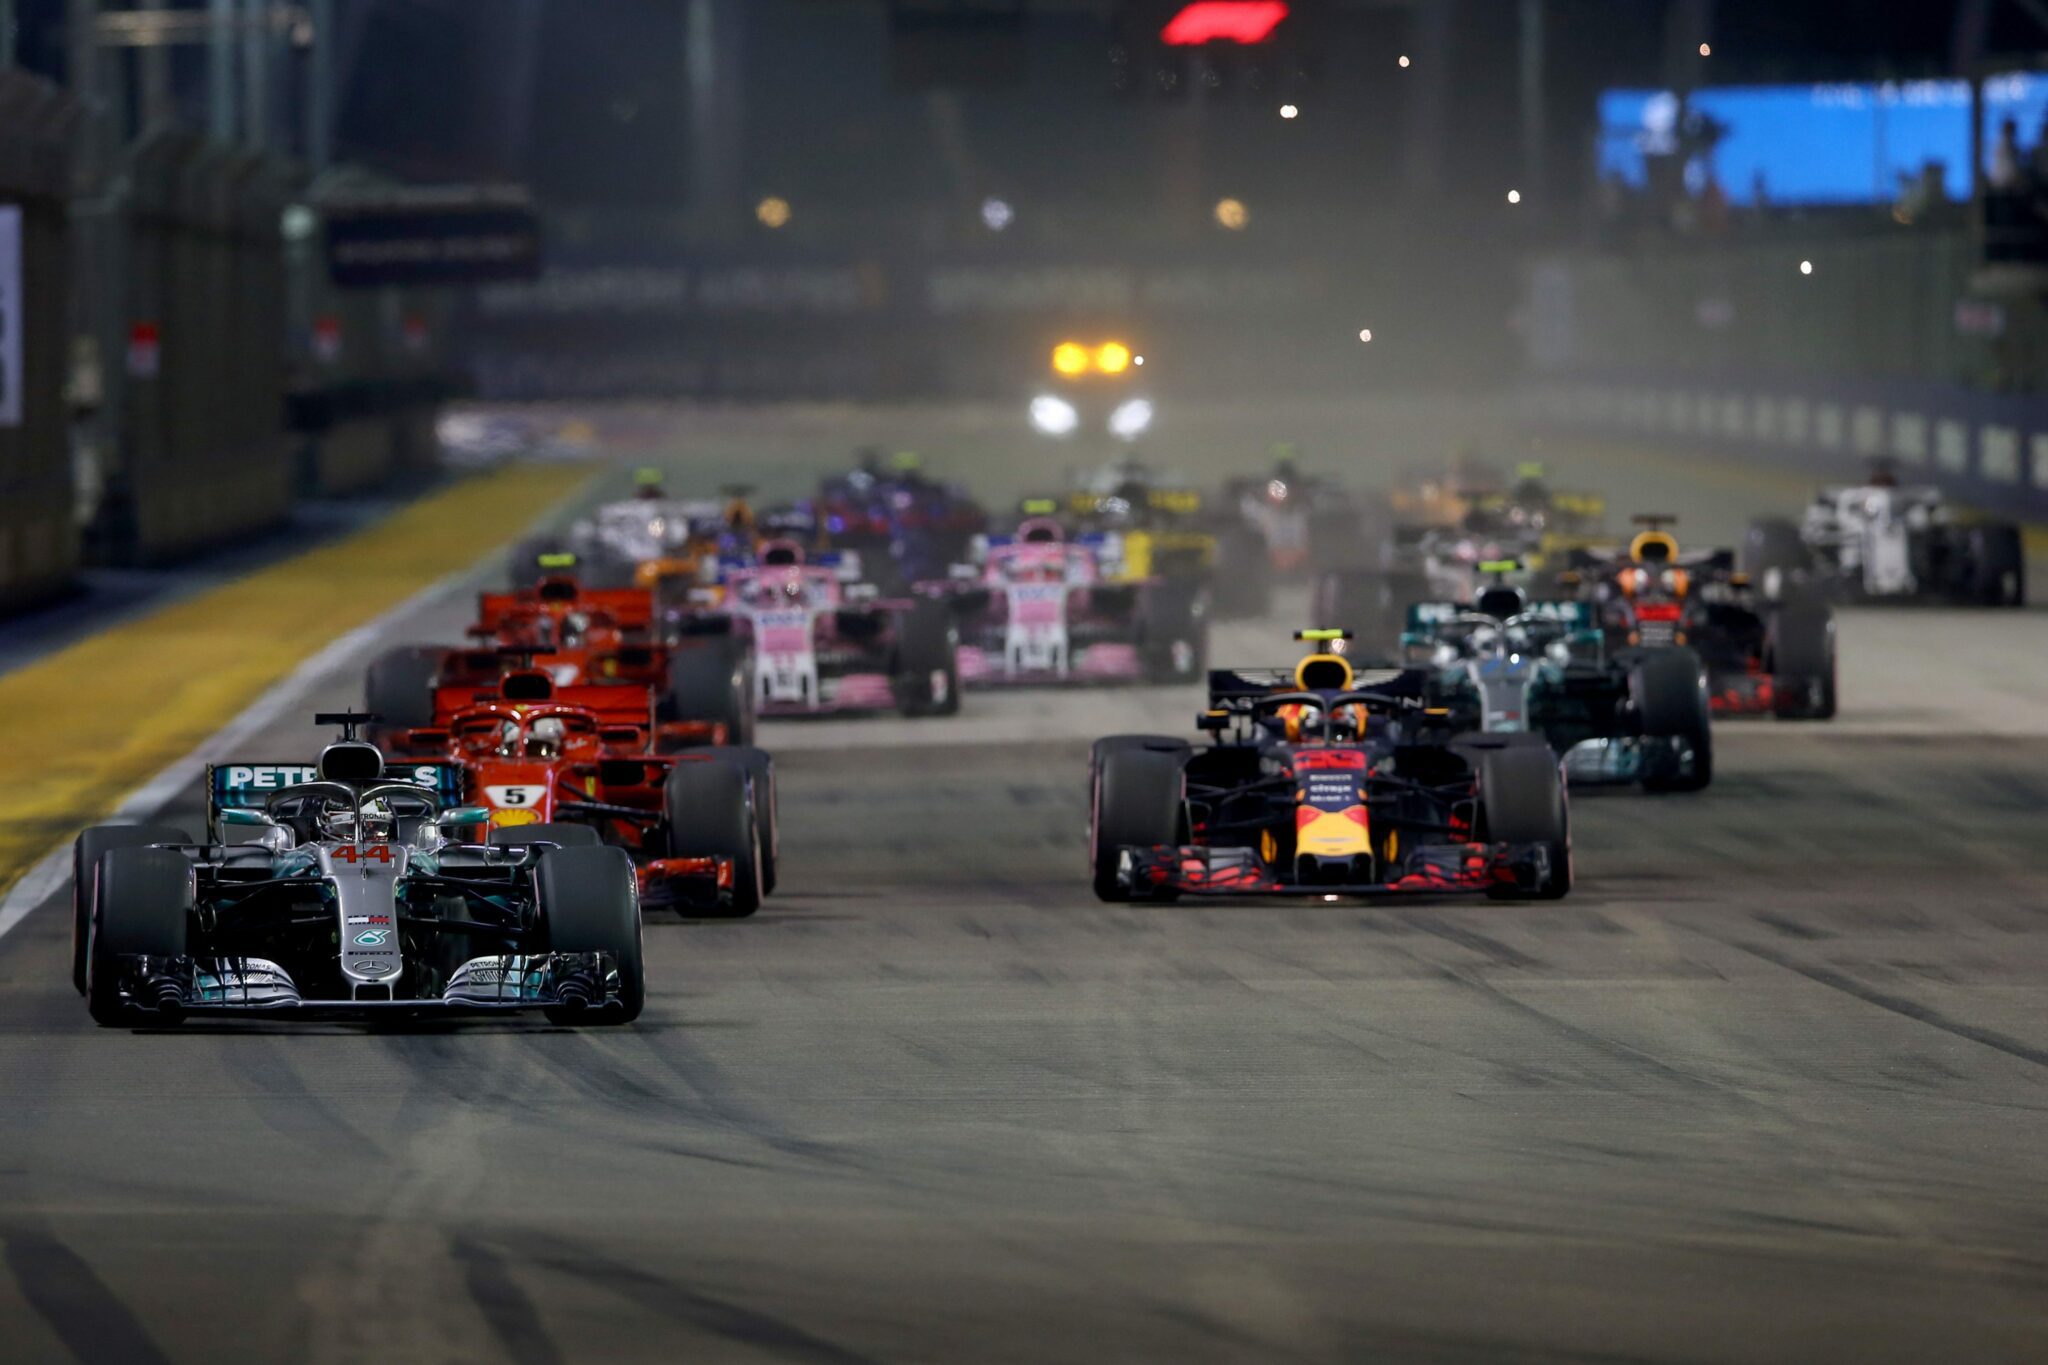 Image of cars racing on the singapore race track at night